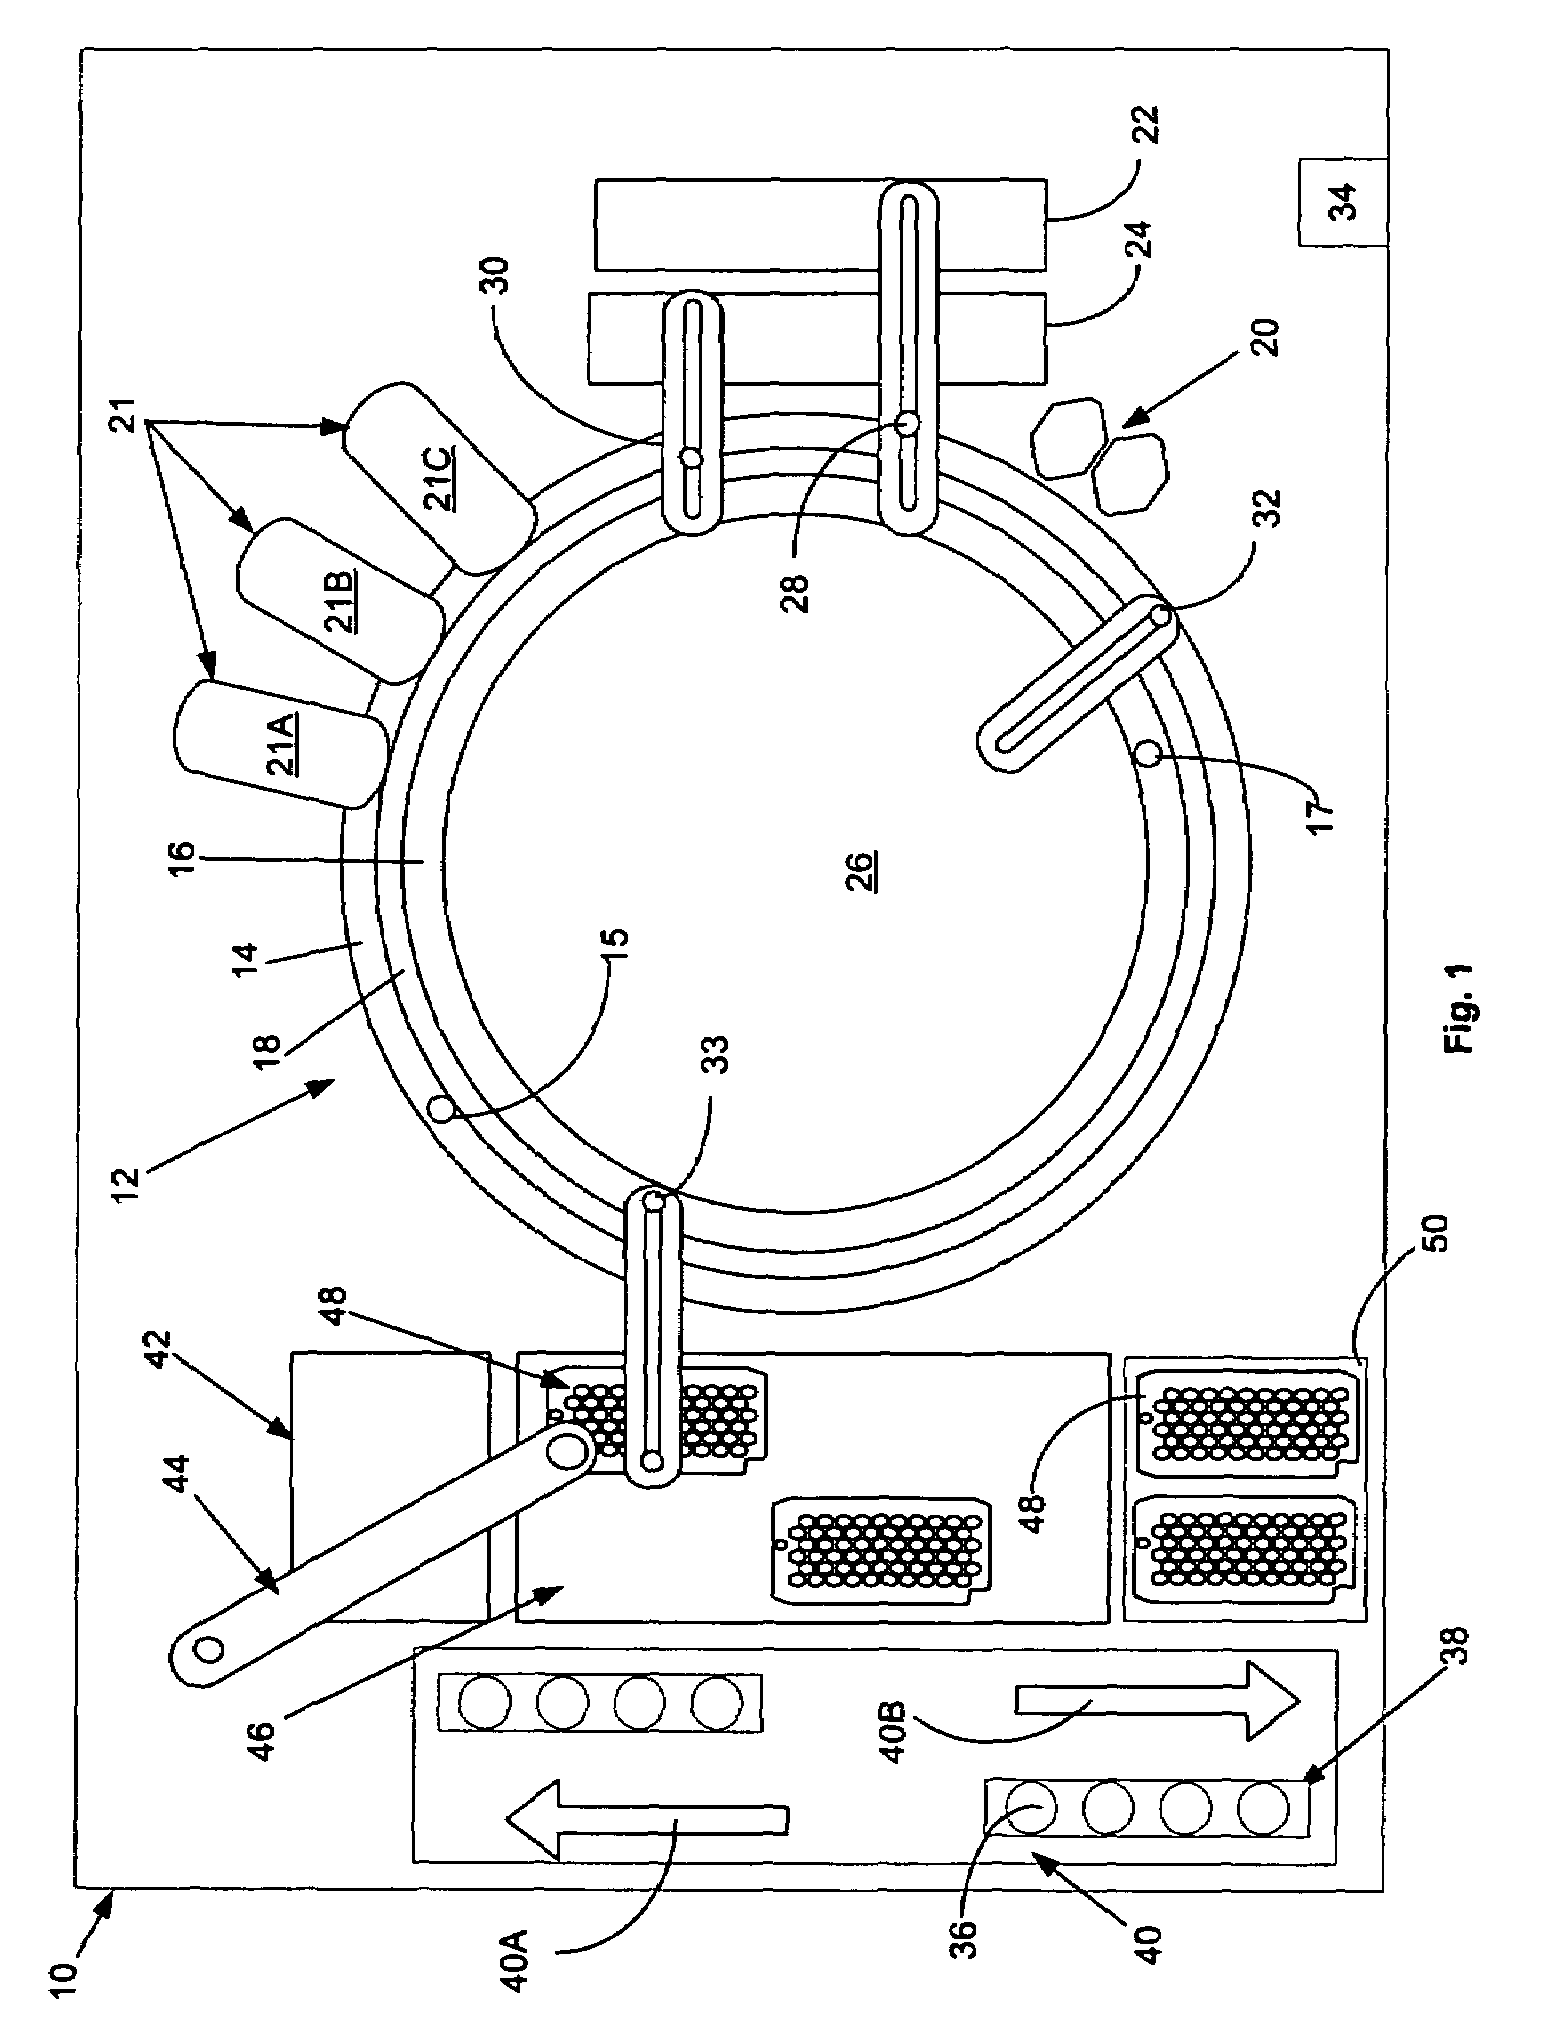 System for automatically storing and reprocessing patient samples in an automatic clinical analyzer